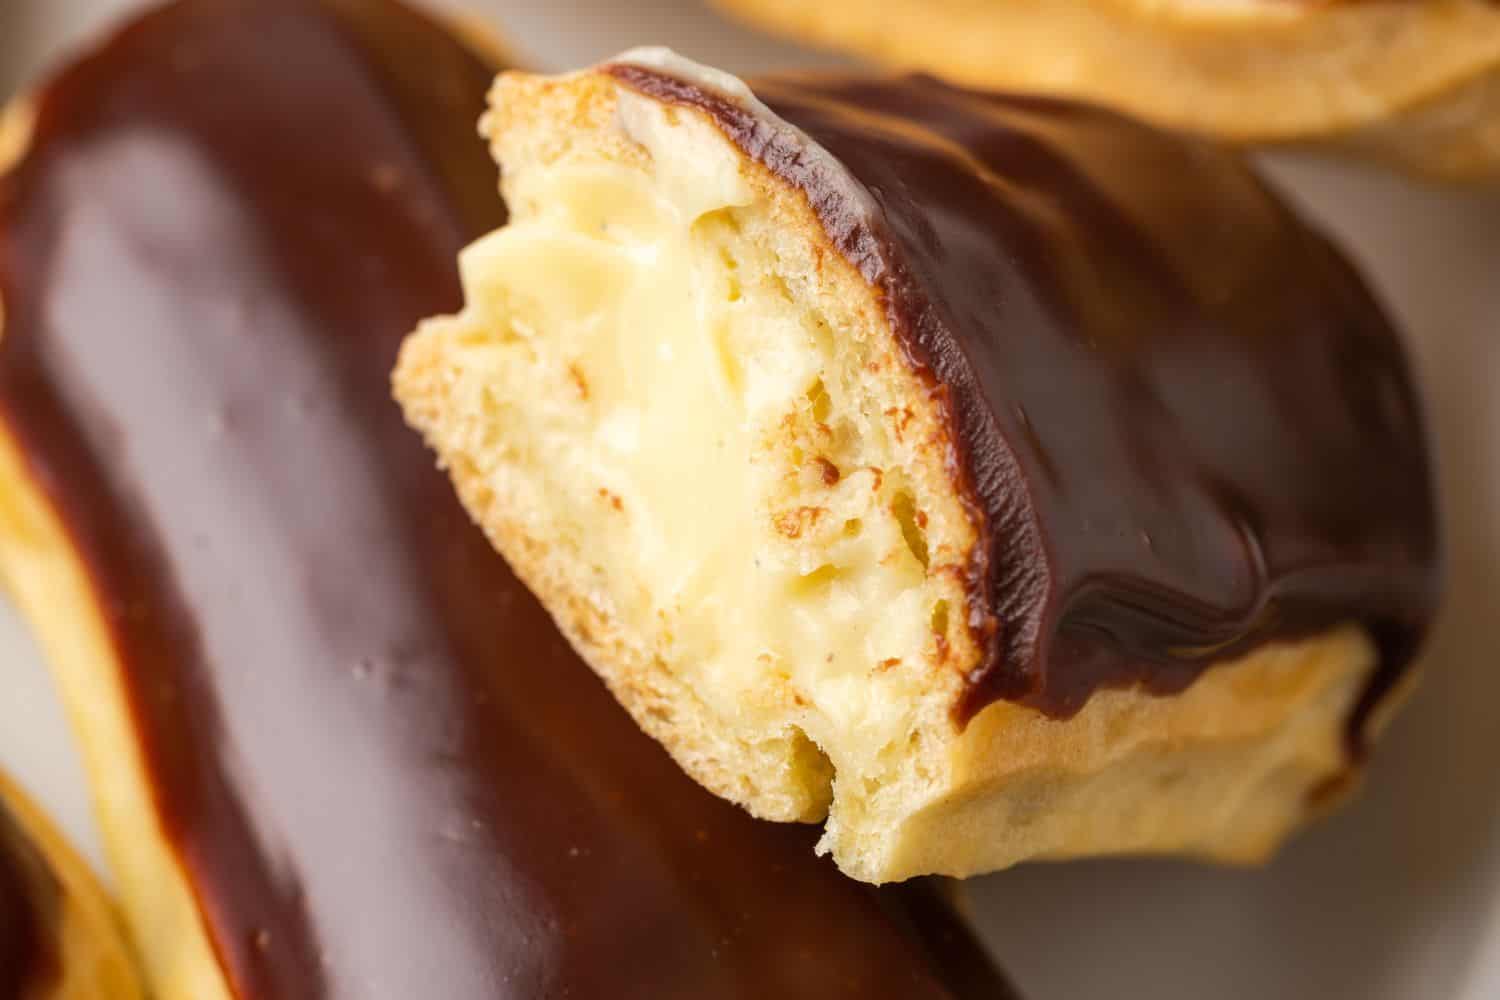 A closeup of the vanilla pastry cream filling in an eclair that's been cut in half.